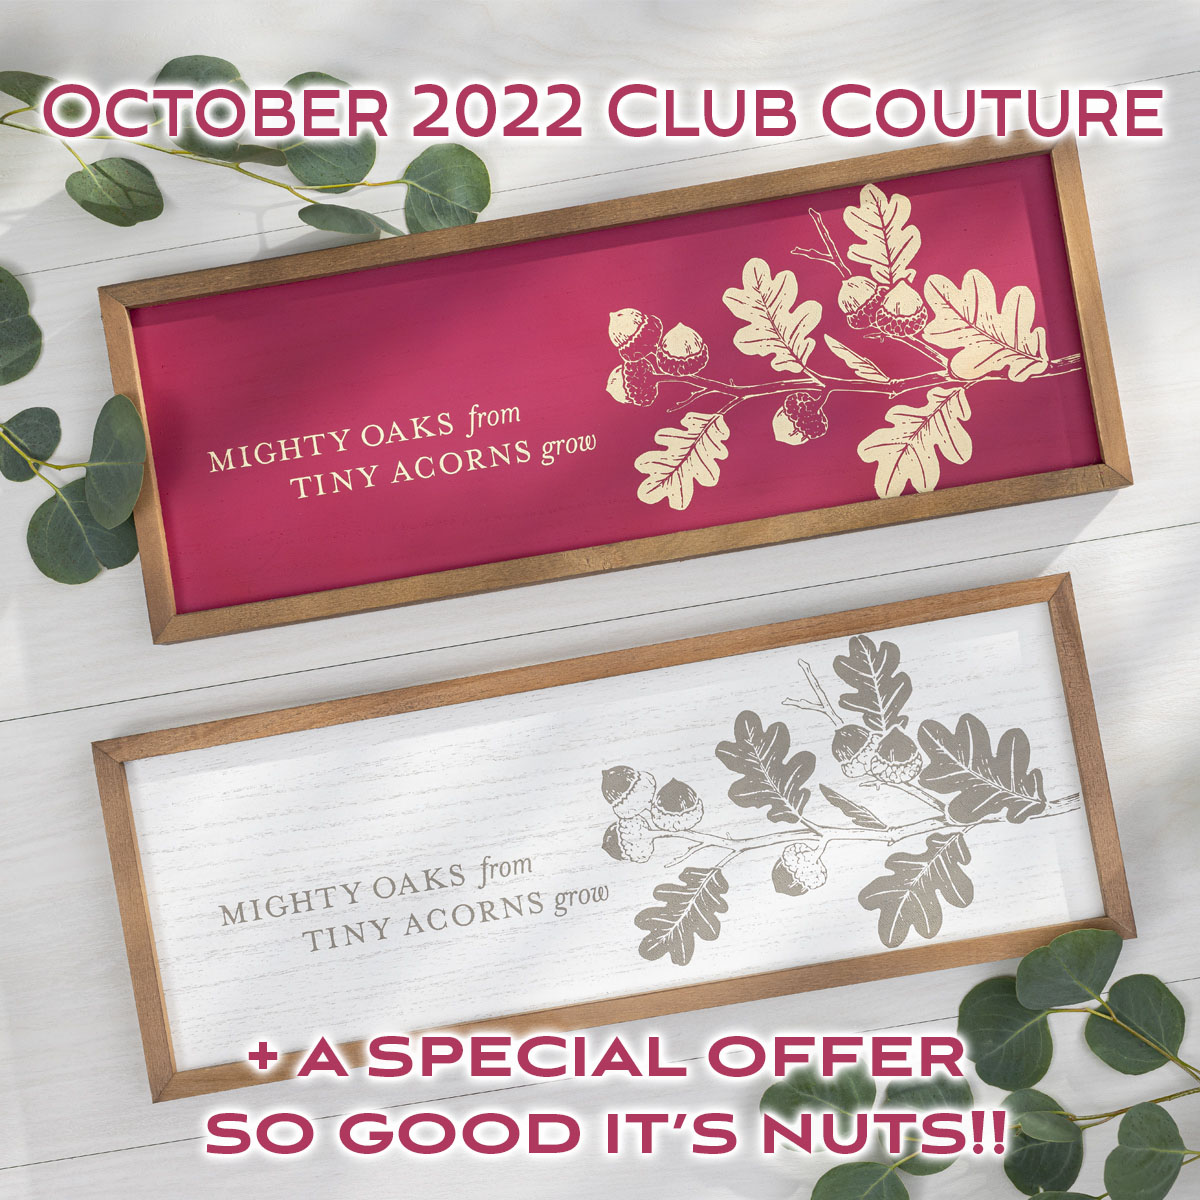 October 2022 Club Couture is a little nuts